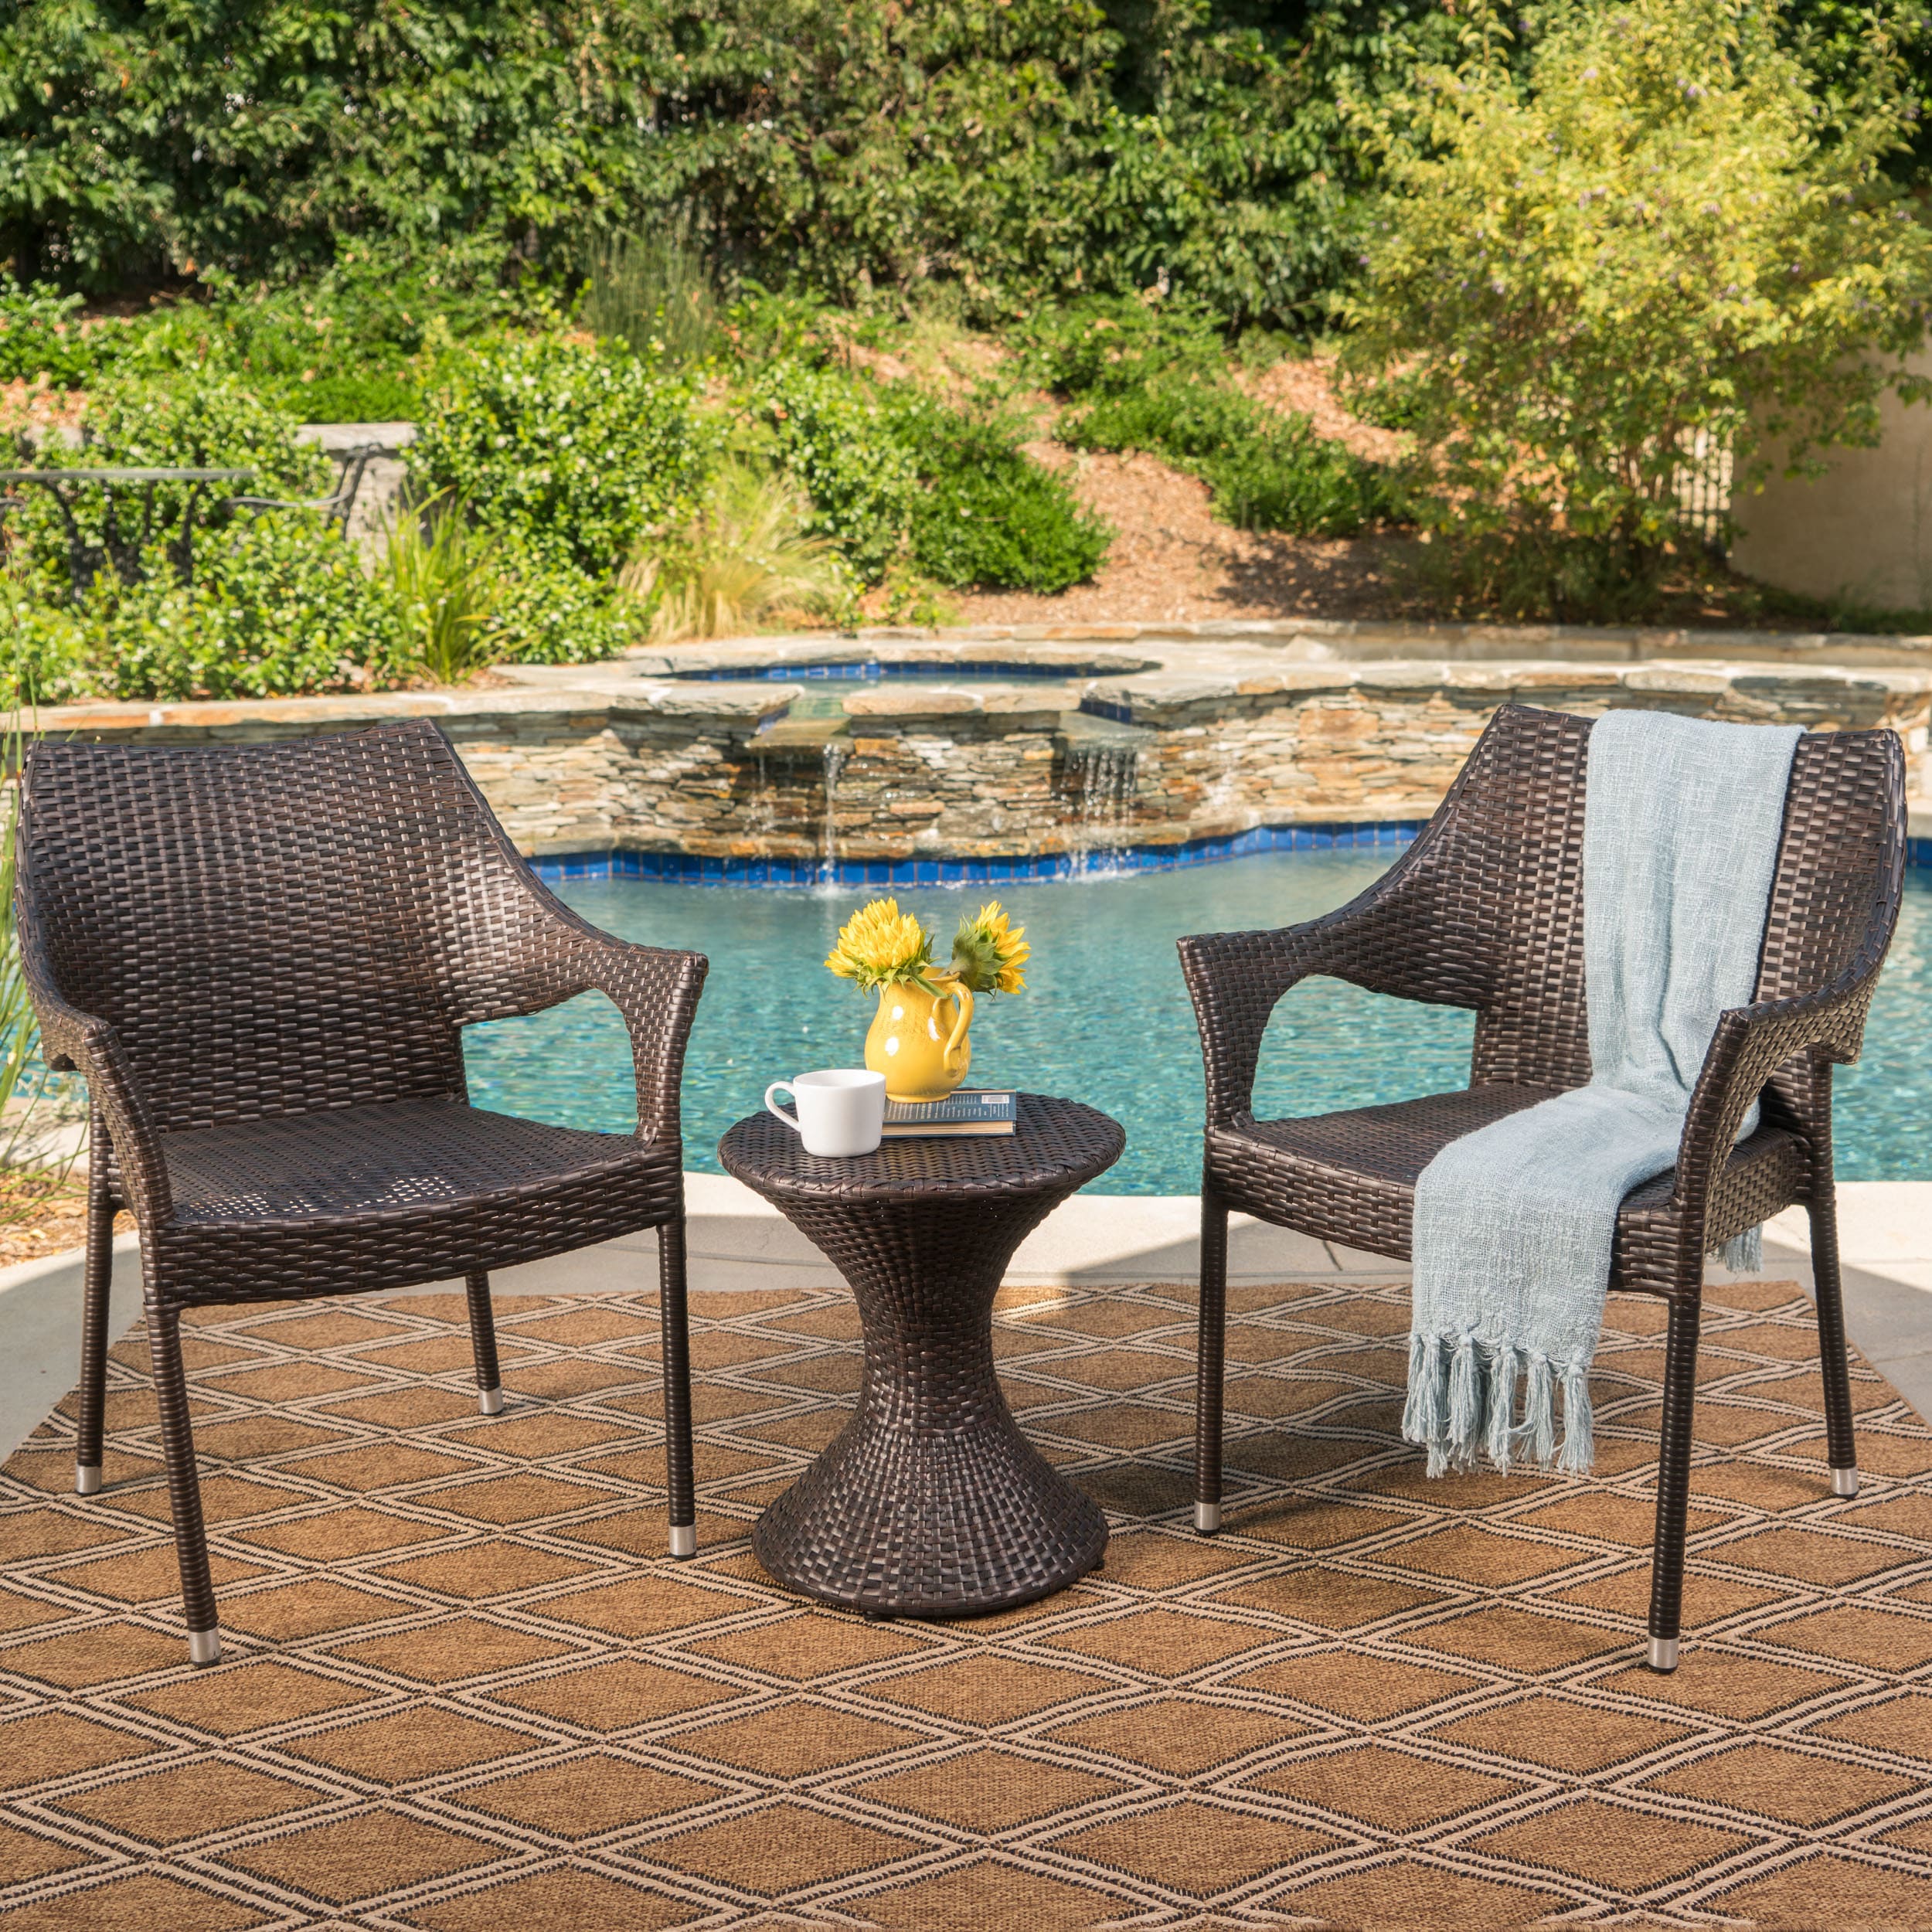 Axeford Outdoor 3-piece Round Wicker Chat Set By Christopher Knight Home